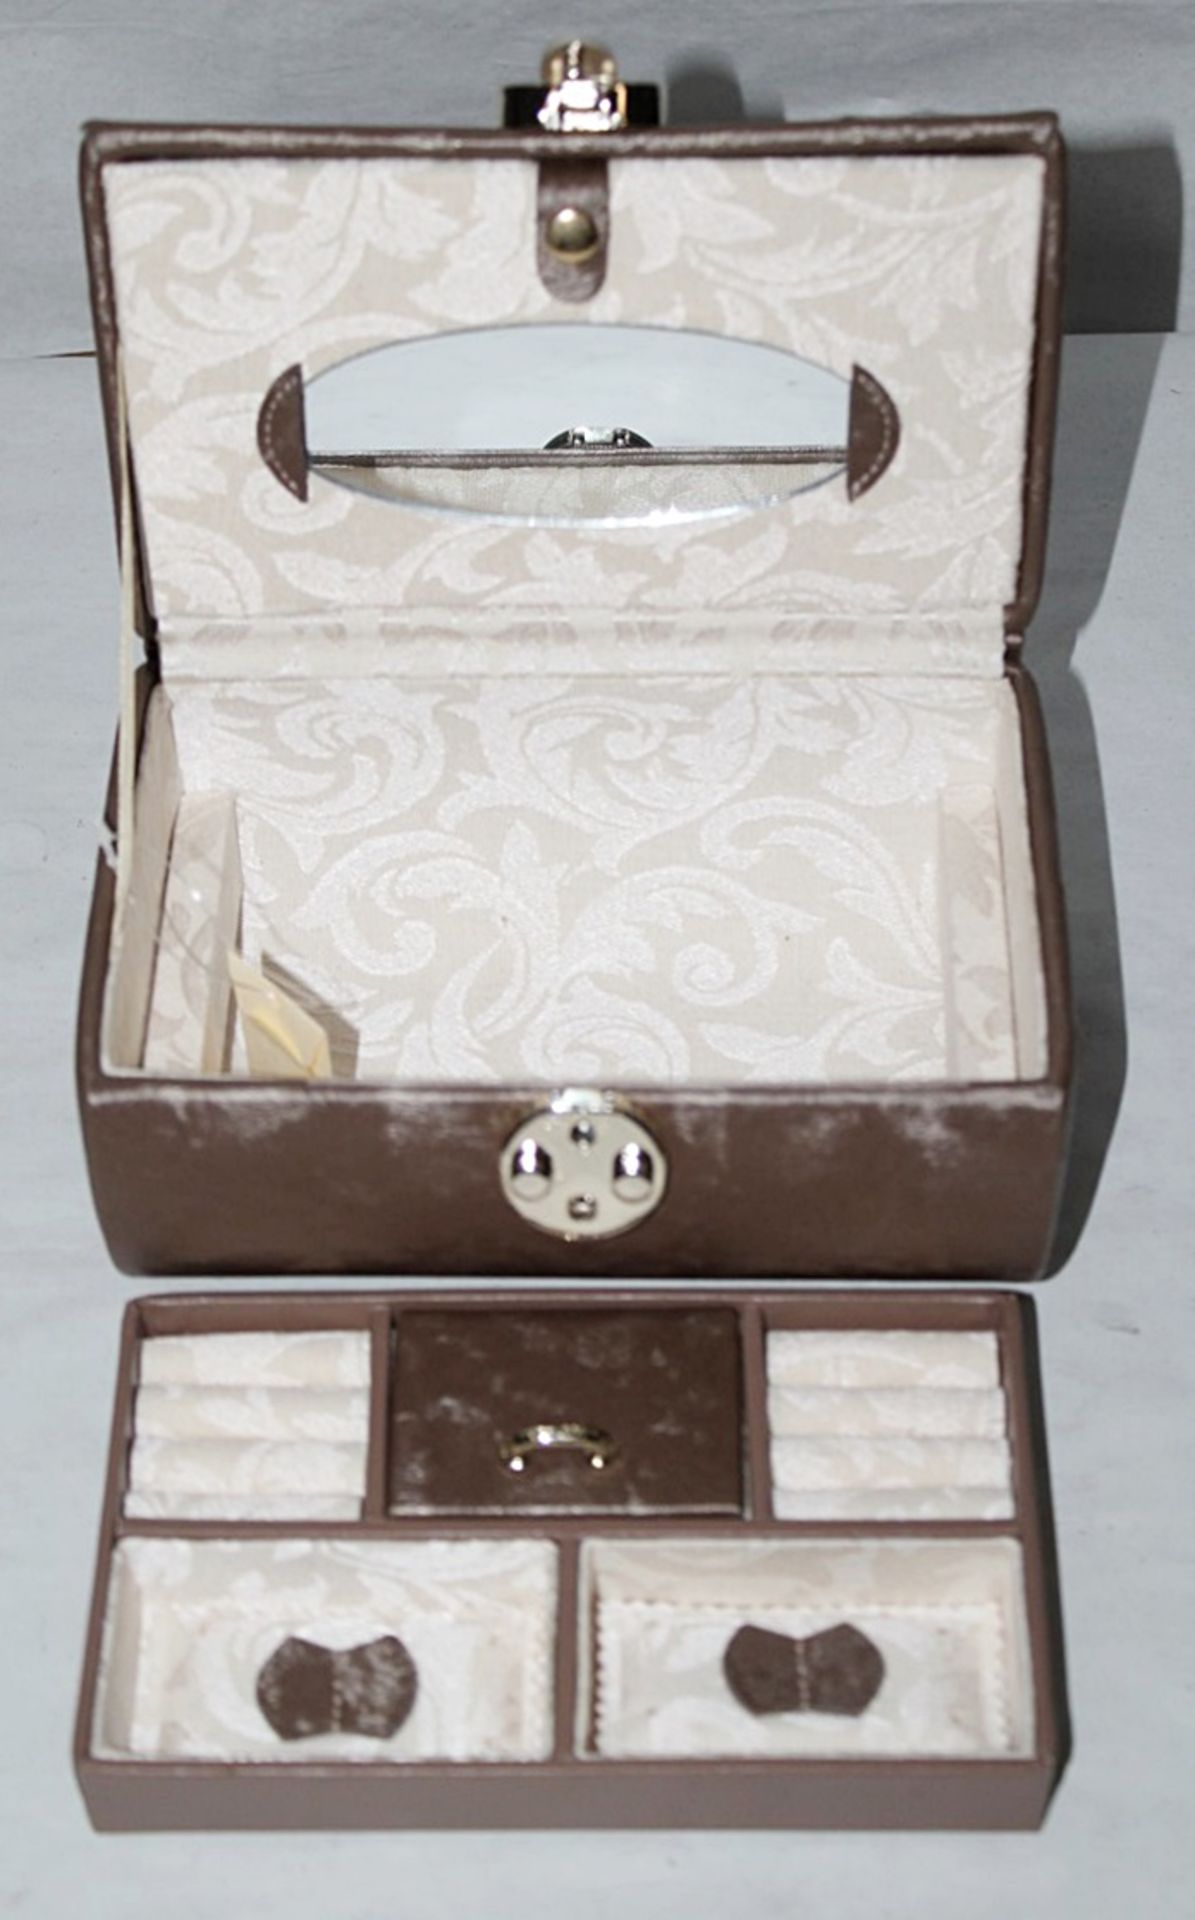 1 x "AB Collezioni" Italian Luxury Jewellery Box (33546) - Ref LT140 – Features A Pull-Out - Image 4 of 5